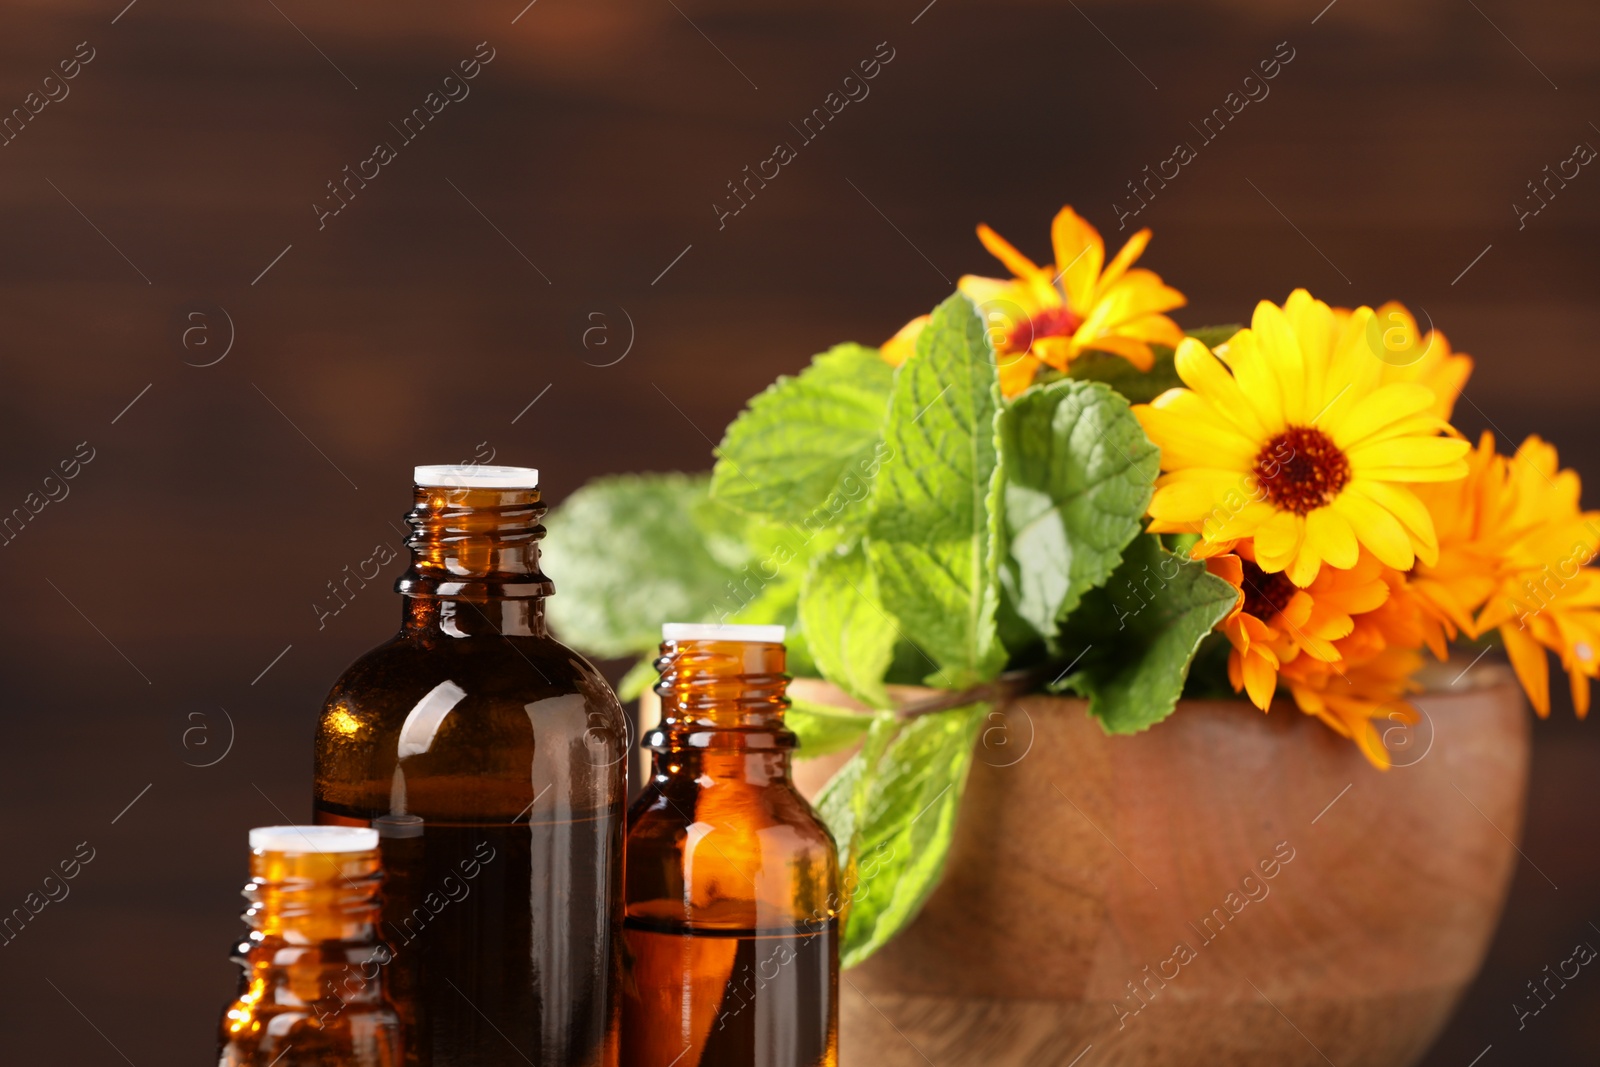 Photo of Bottles with essential oils, mint and flowers on blurred background, closeup